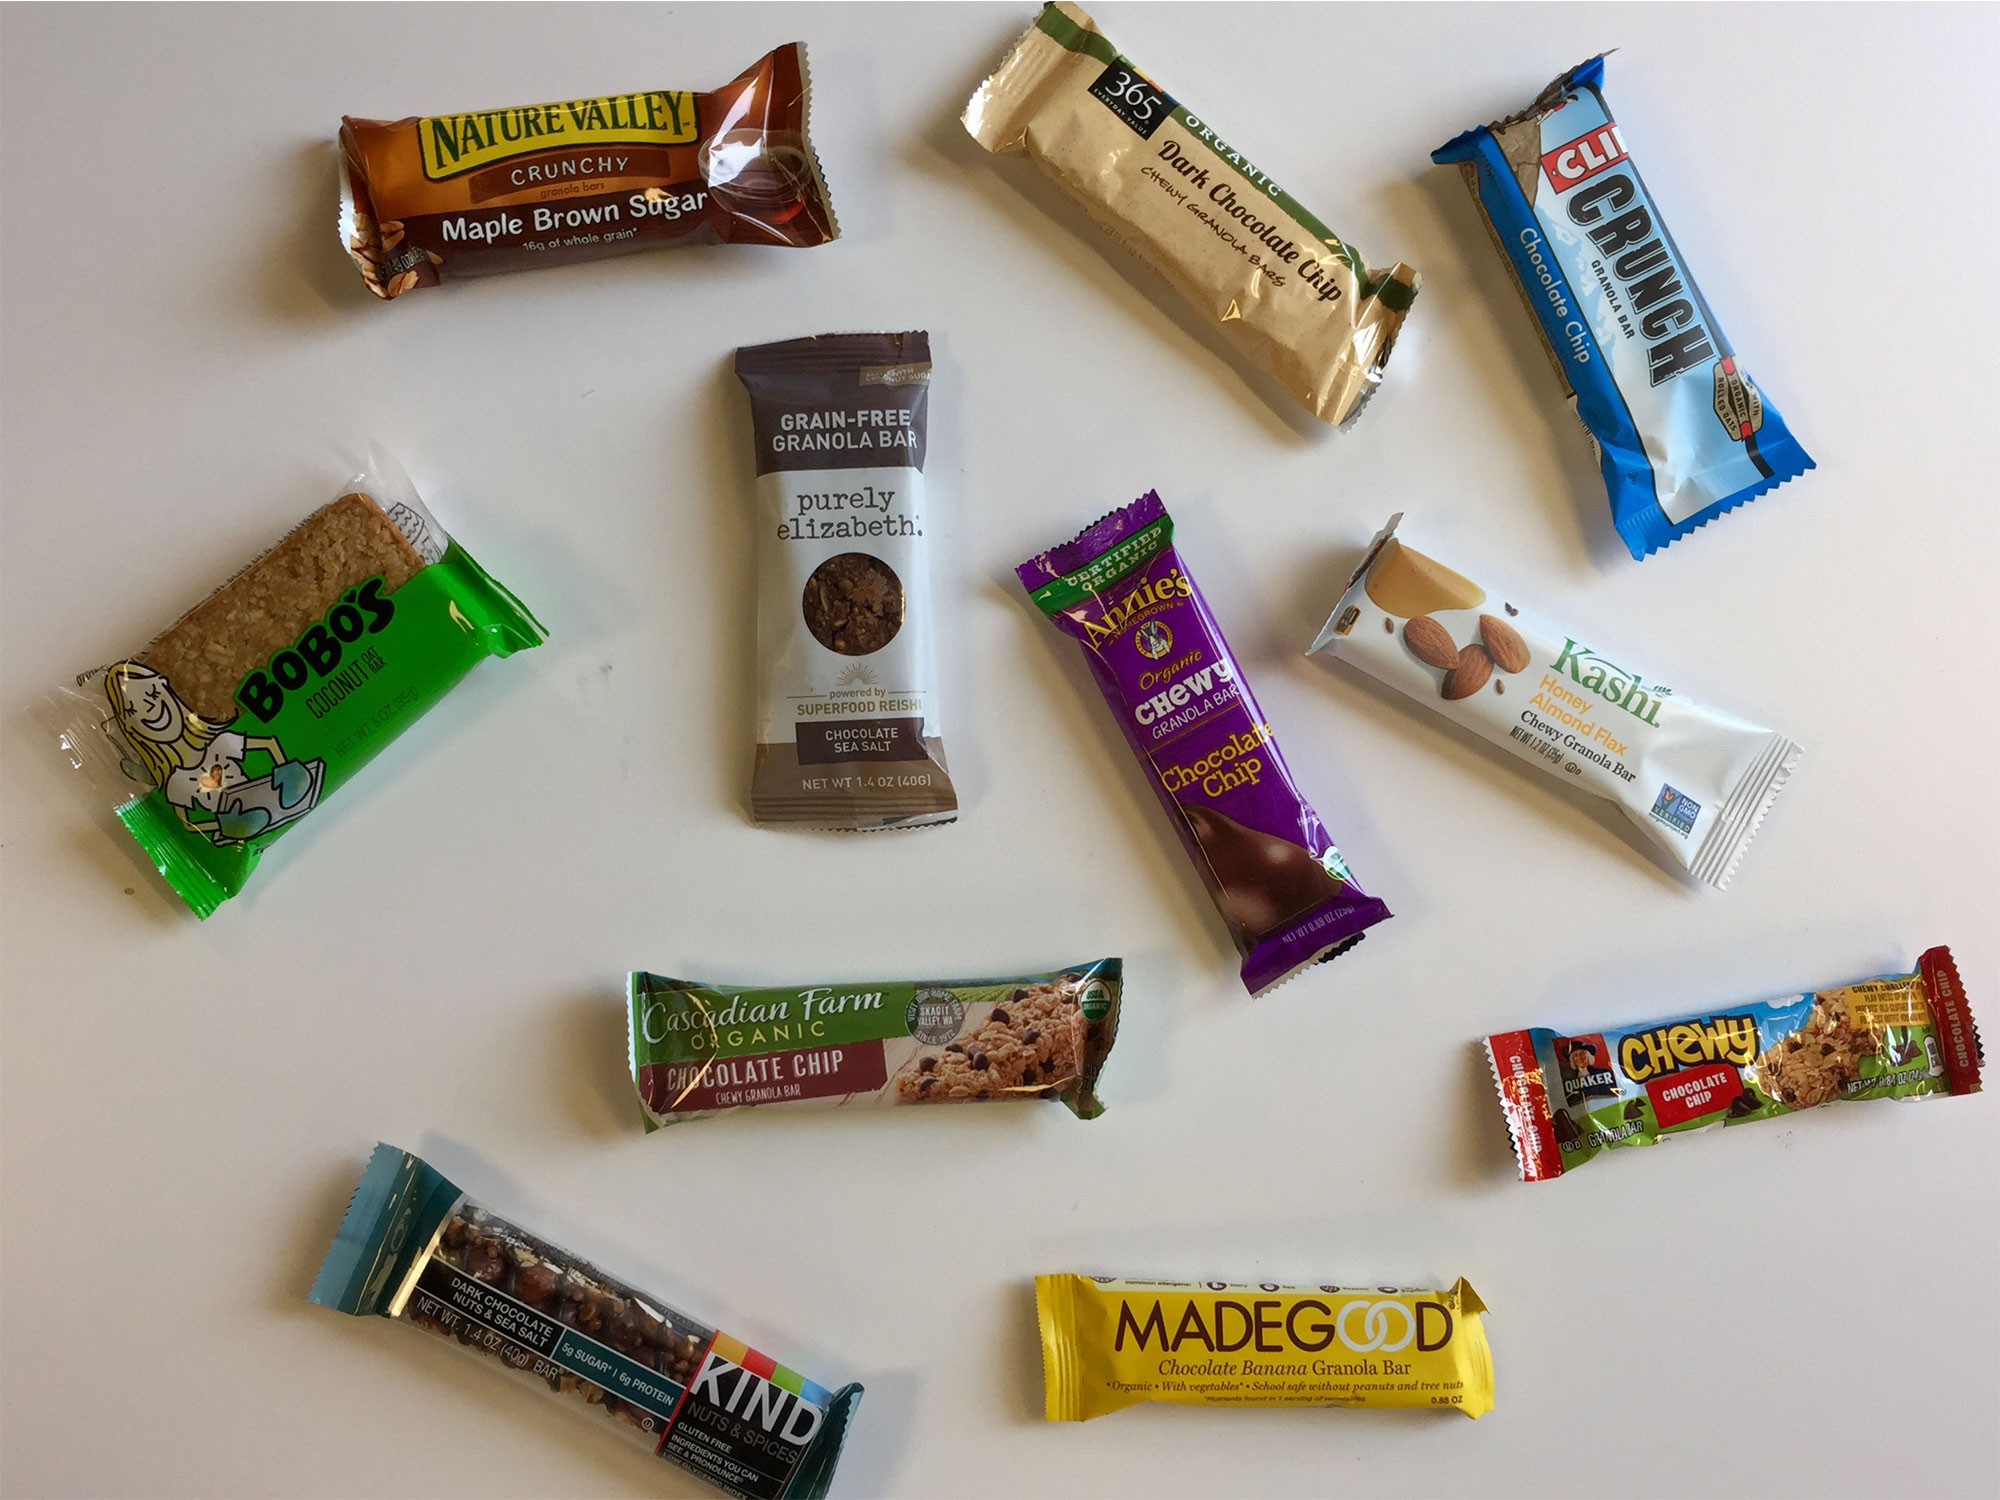 We Tried 11 Granola Bars to Find the Best One | MyRecipes